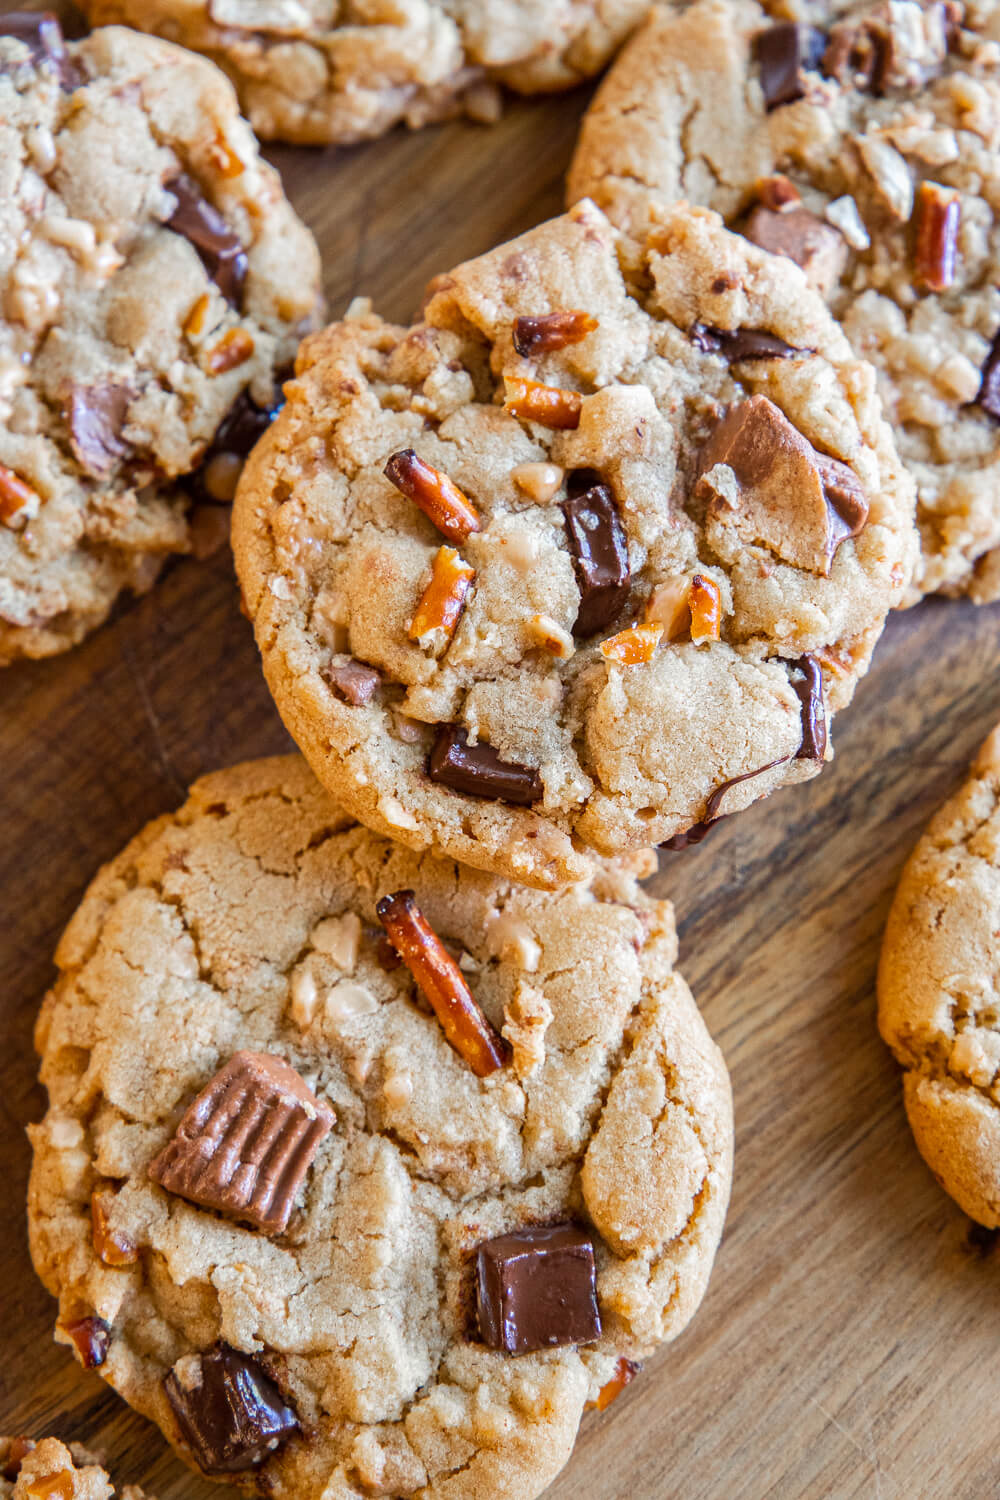 These brown butter cookies with chocolate chips toffee bits are amazing! Make them even better by adding pretzel pieces and chopped up Reese's peanut butter cups. These care such a hit! They are soft and chewy and full of flavor and yummy textures.